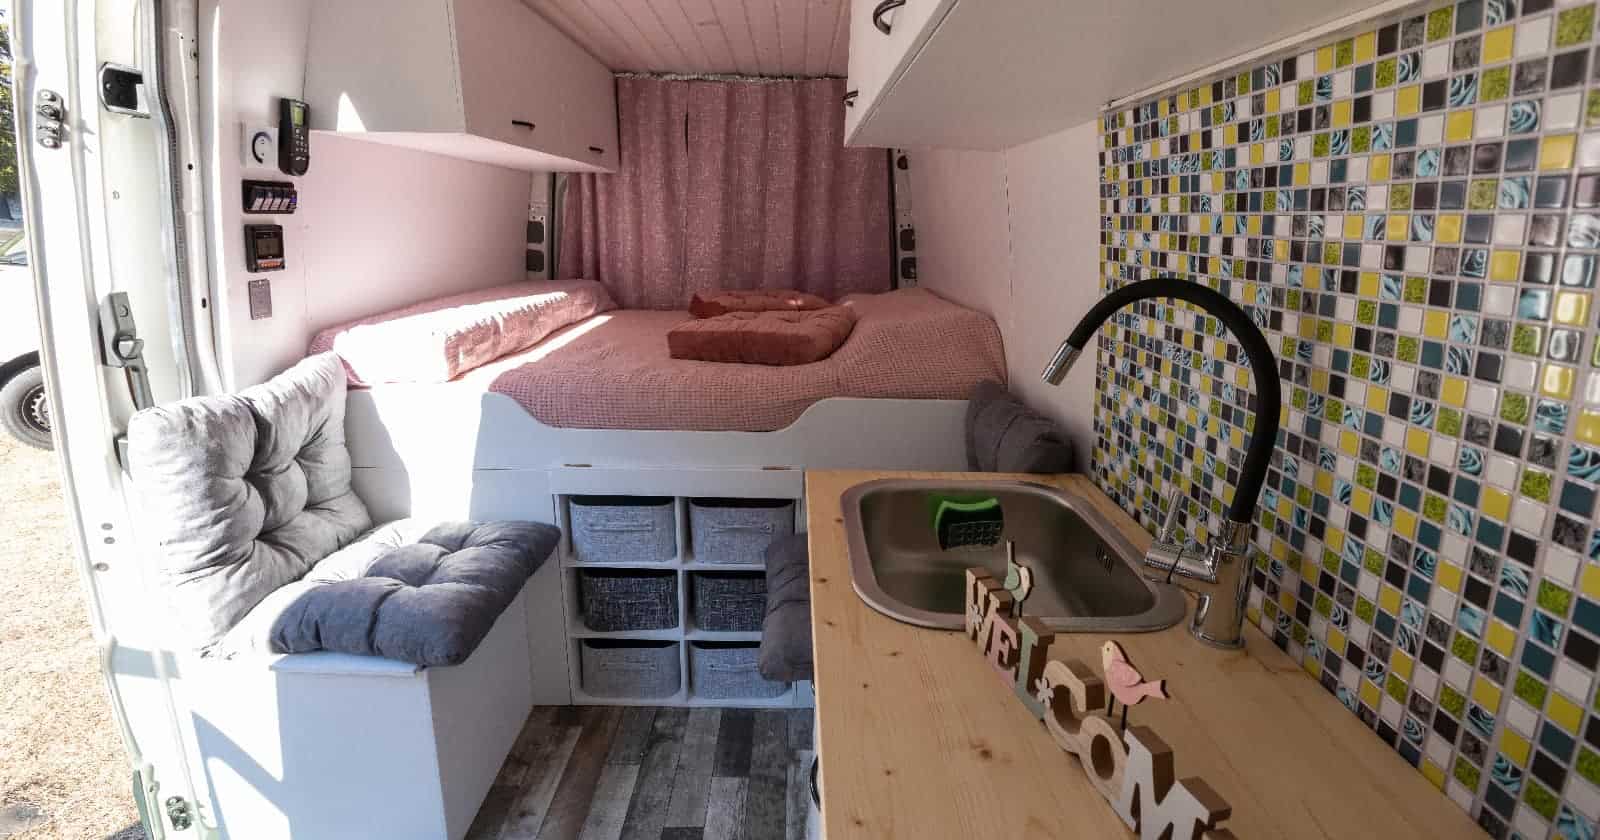 interior of van conversion displaying bed, bench and kitchen counter with neat and tidy campervan storage cubbies